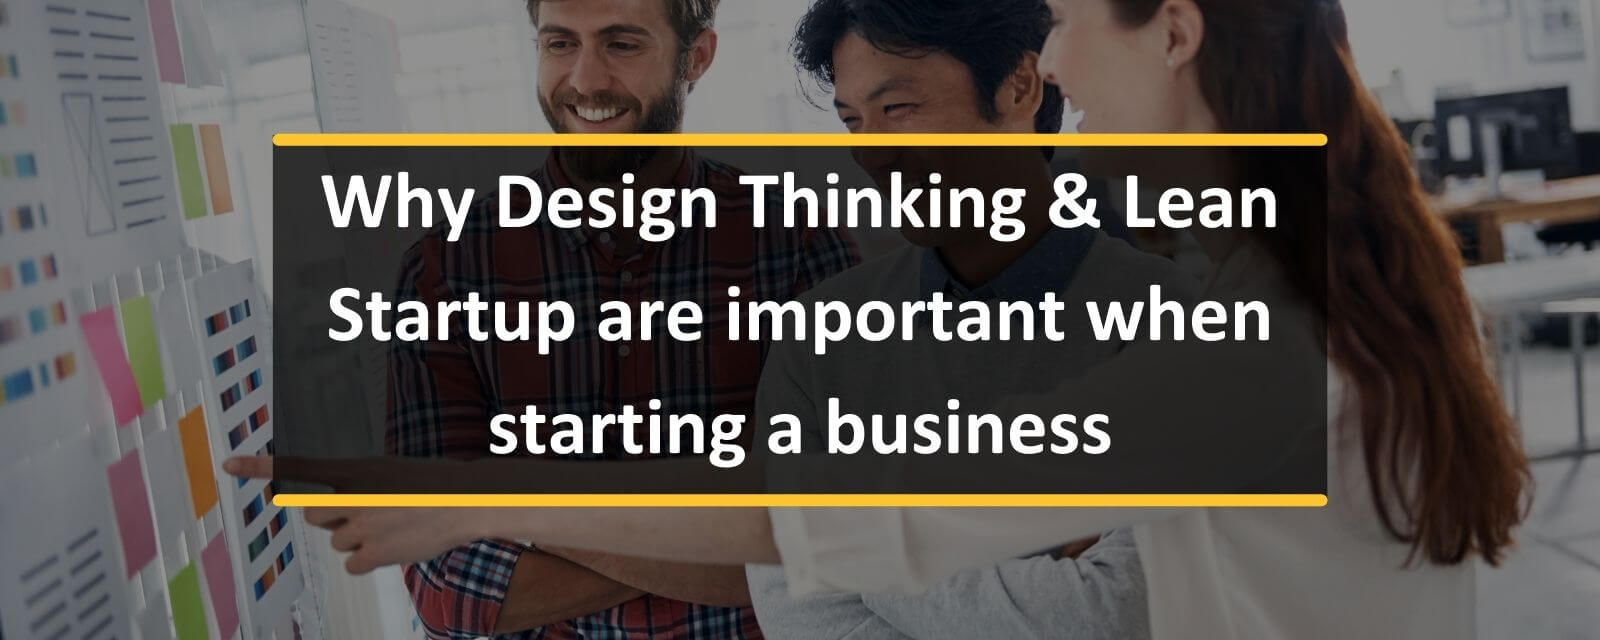 banner image with words, 'Why Design Thinking & Lean Startup are important when starting a business'